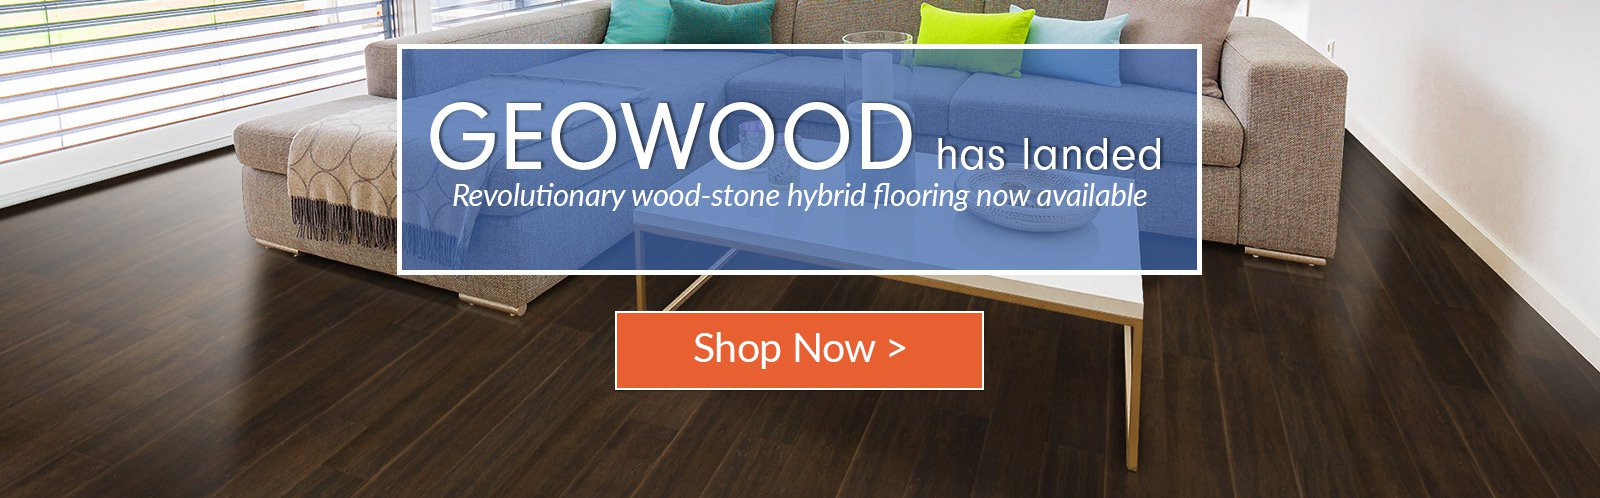 22 Unique Hardwood Floor Installation Reno Nv 2024 free download hardwood floor installation reno nv of green building construction materials and home decor cali bamboo in geowood launch homepage slider